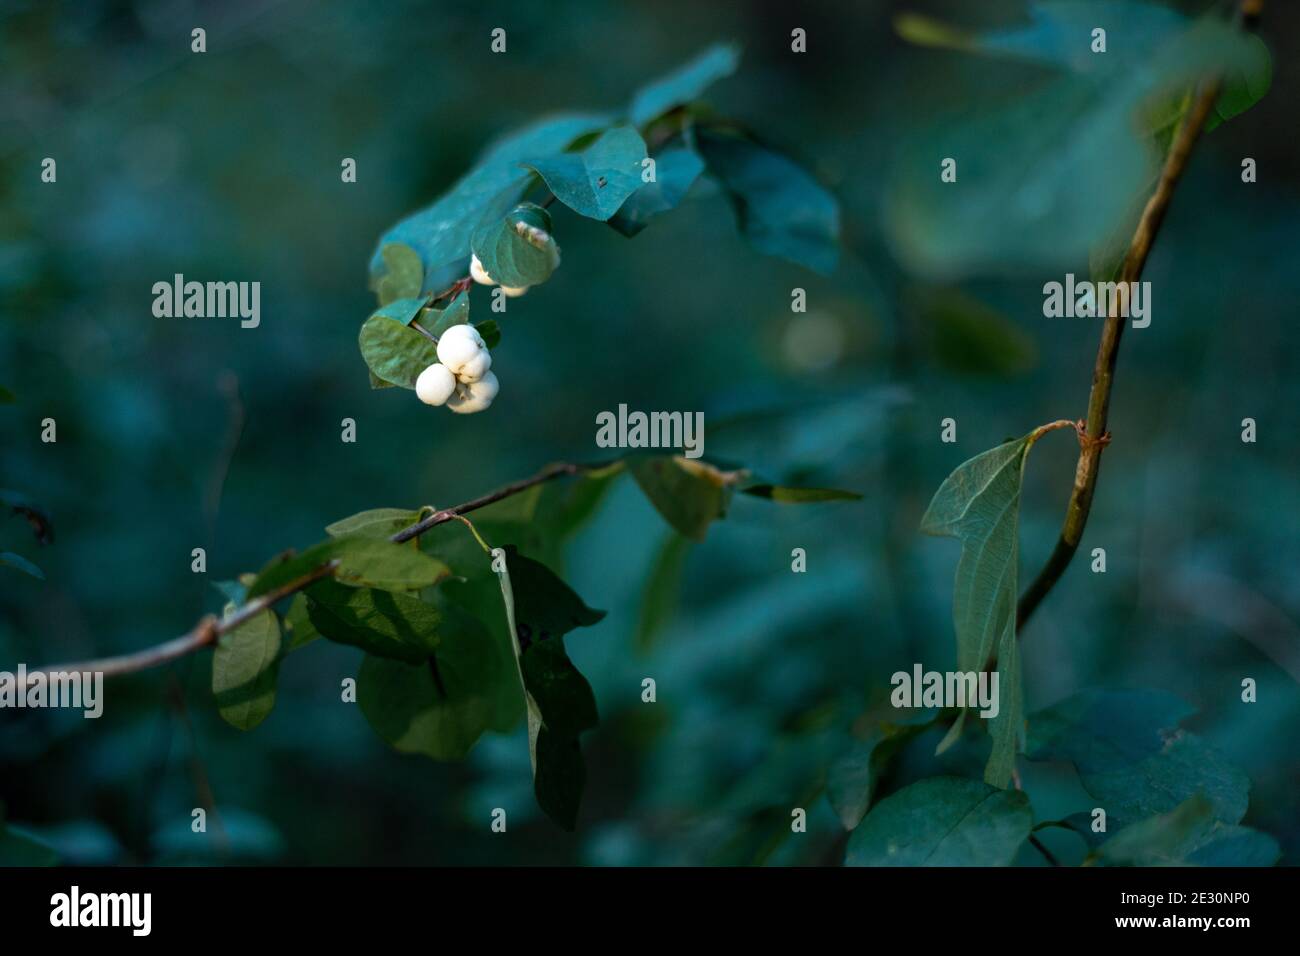 White snowberry or wolfberry in the forest. Stock Photo